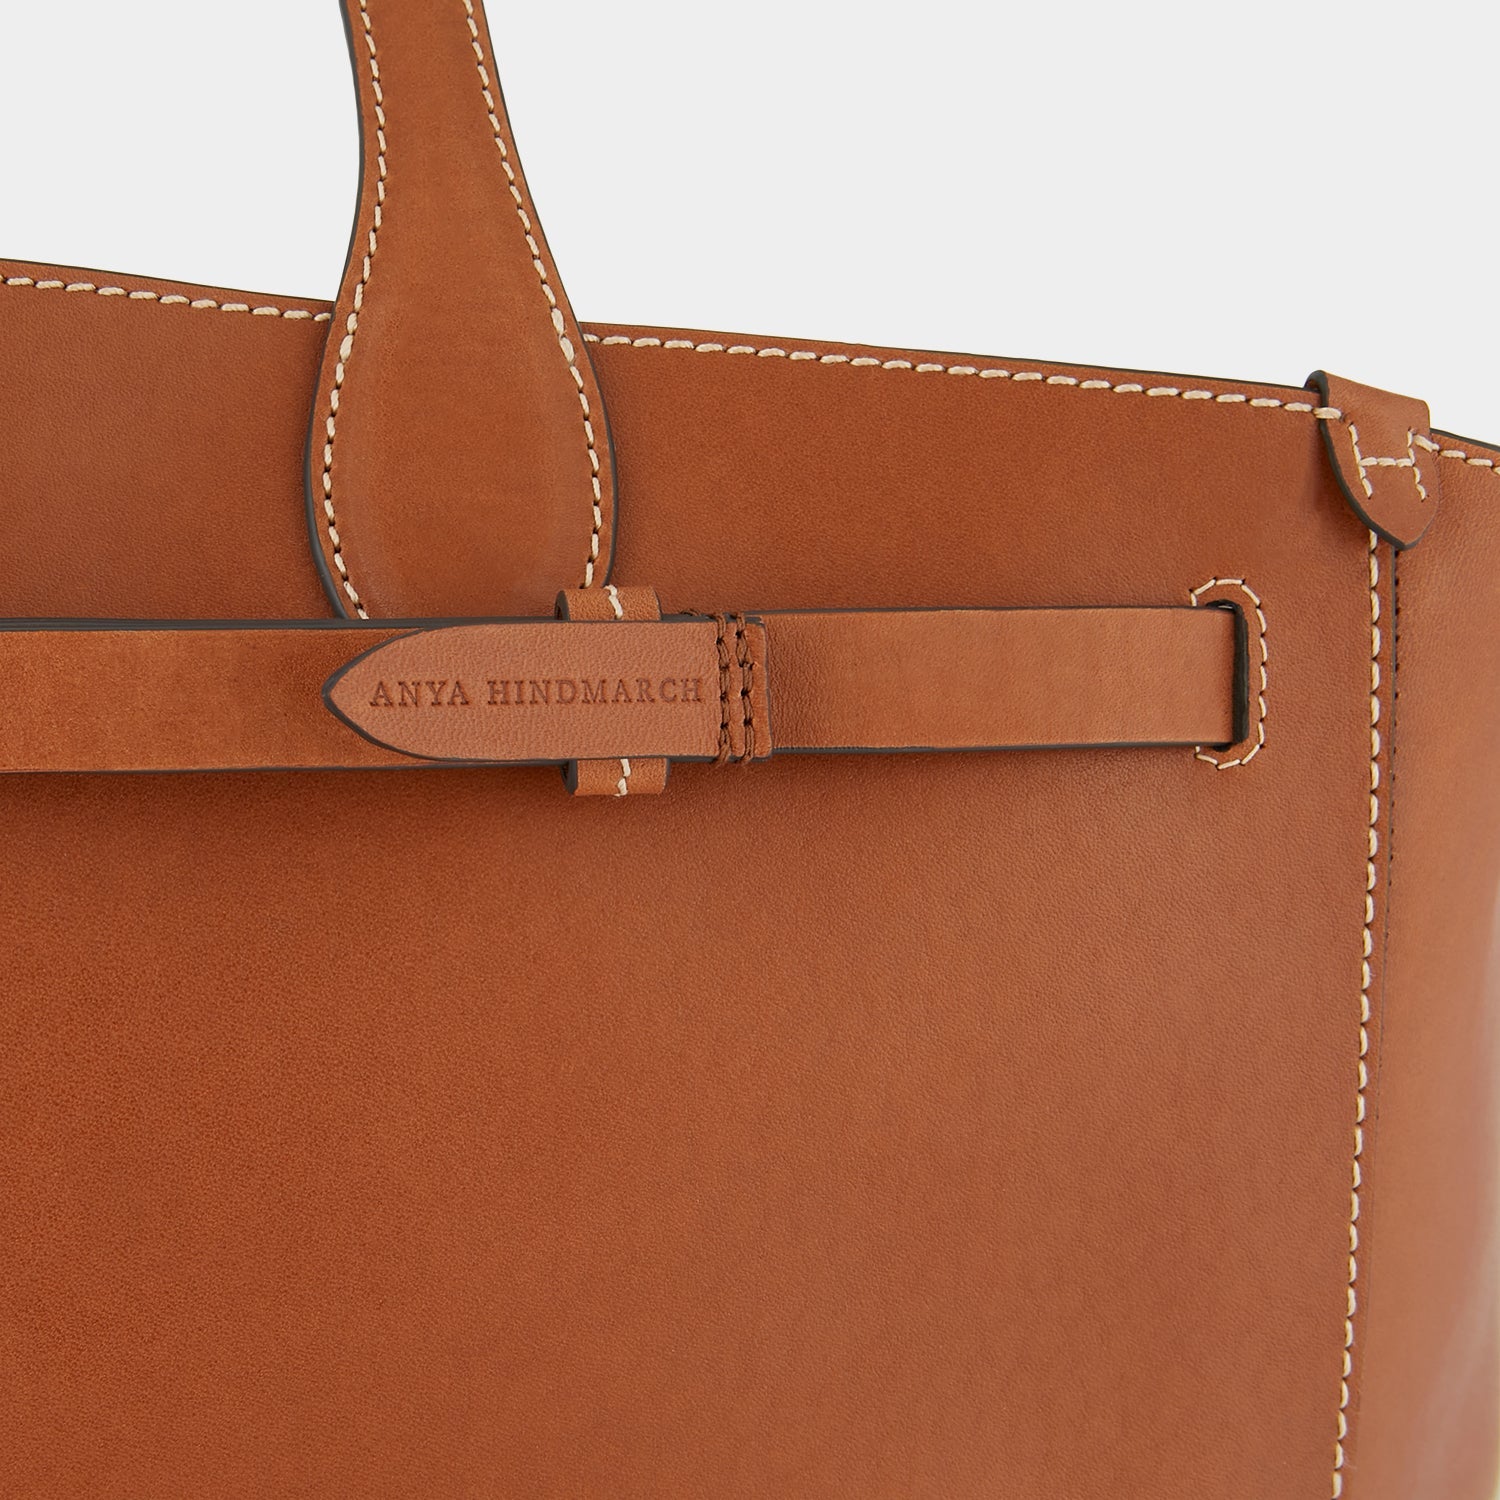 Return to Nature Tote -

                  
                    Compostable Leather in Tan -
                  

                  Anya Hindmarch EU
